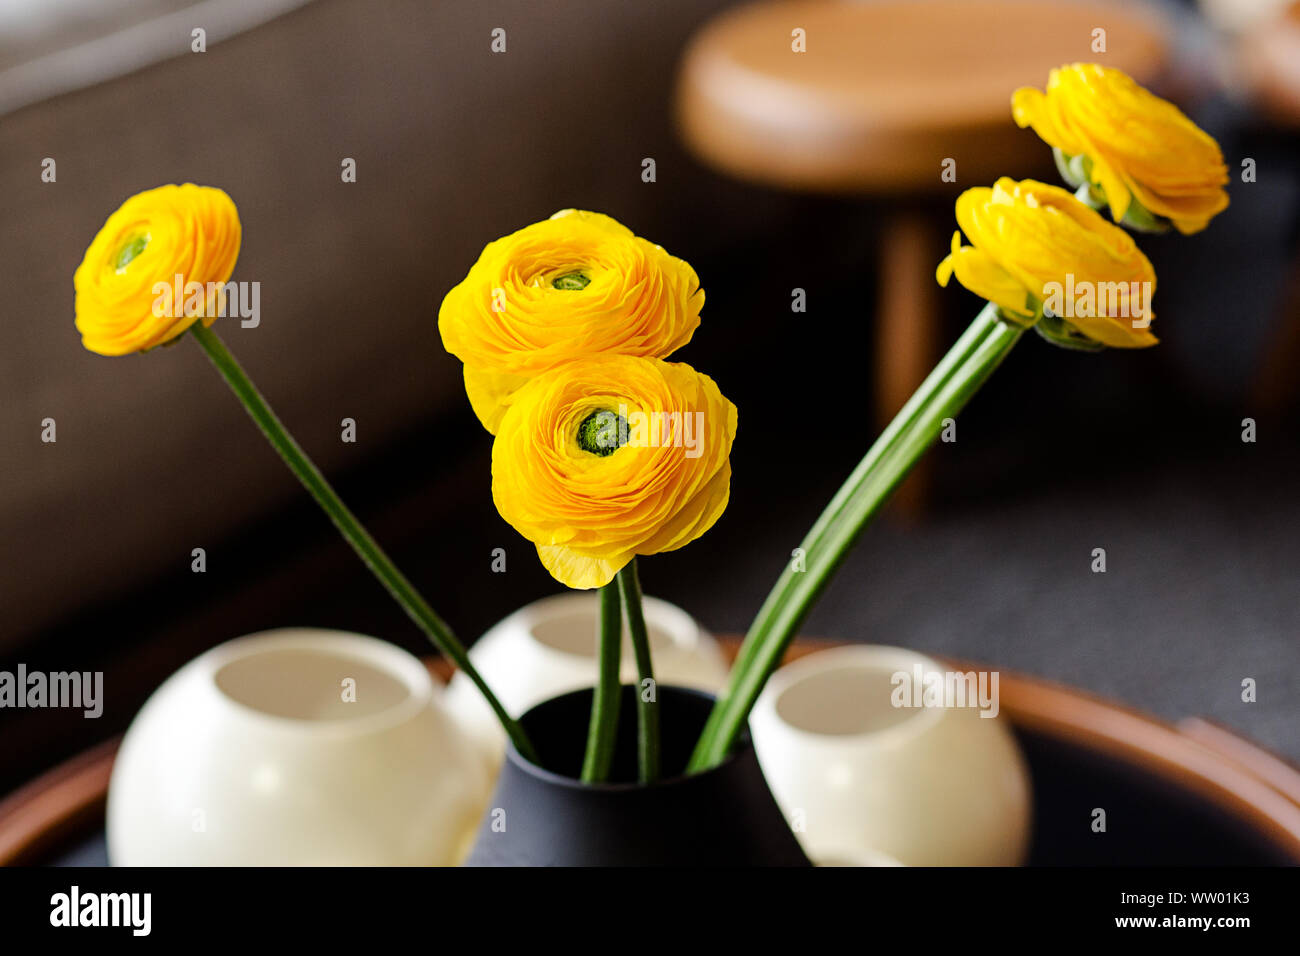 Bouquet of Persian buttercups (Ranunculus asiaticus) in a black vase. yellow flowers in the interior. close up. Floral composition, scene, daylight. Stock Photo